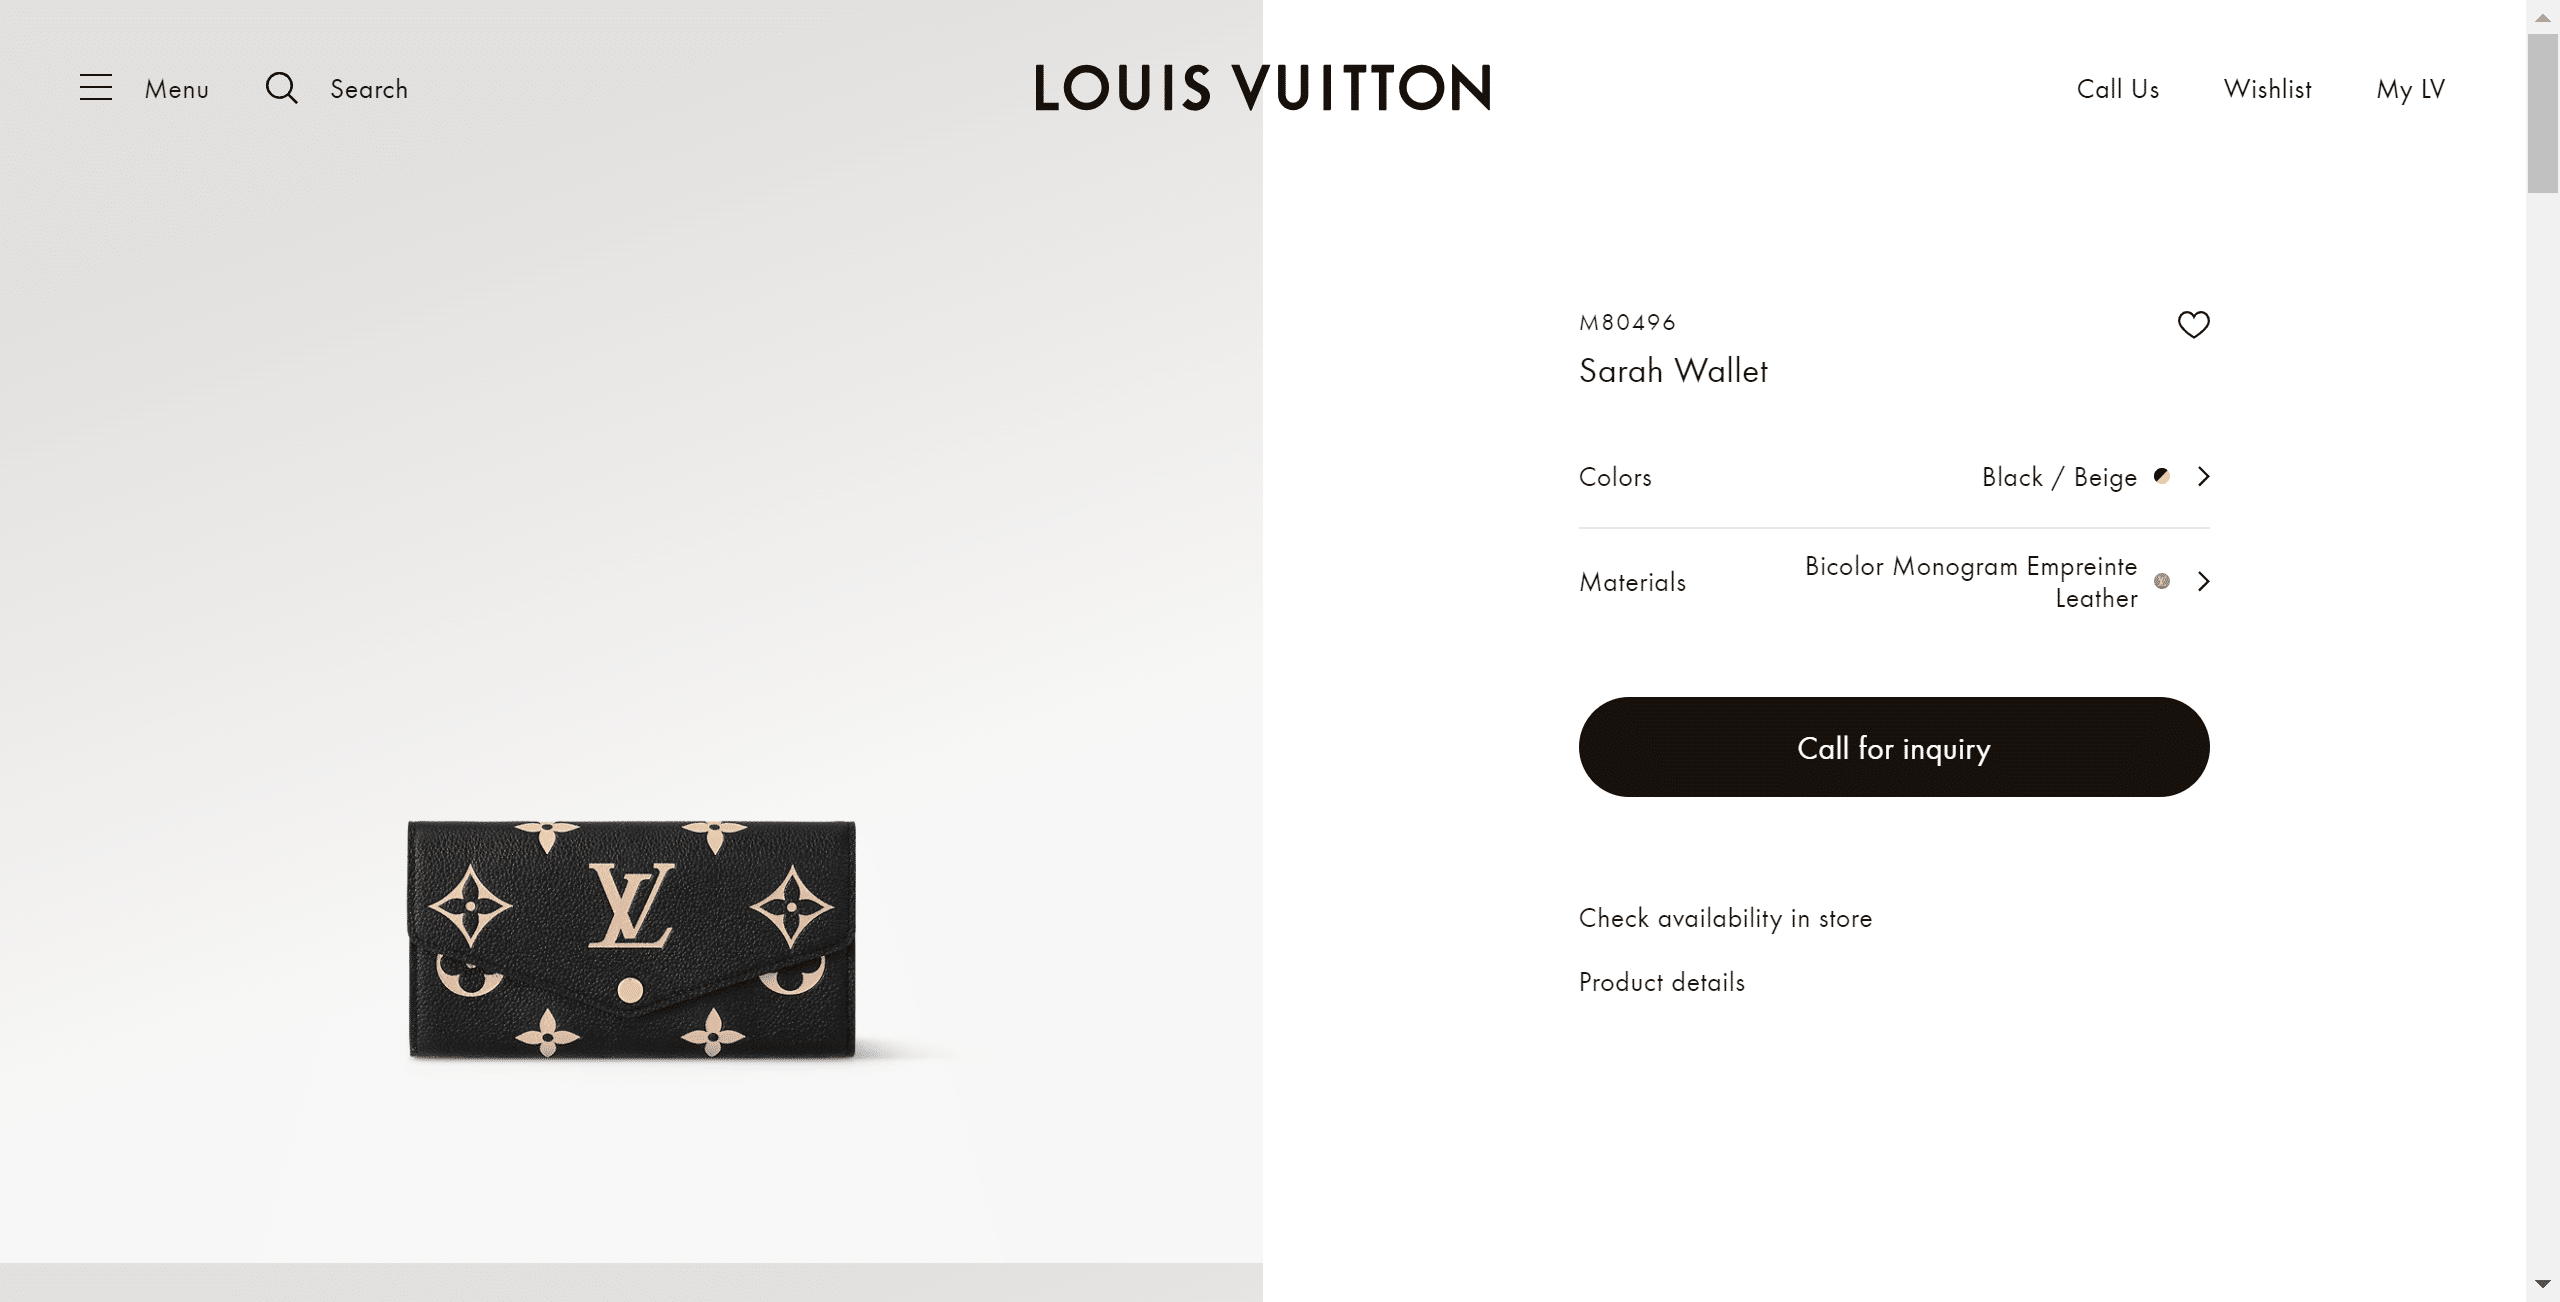 Sarah-Wallet-Bicolor-Monogram-Empreinte-Leather-Wallets-and-Small-Leather-Goods-LOUIS-VUITTON.png